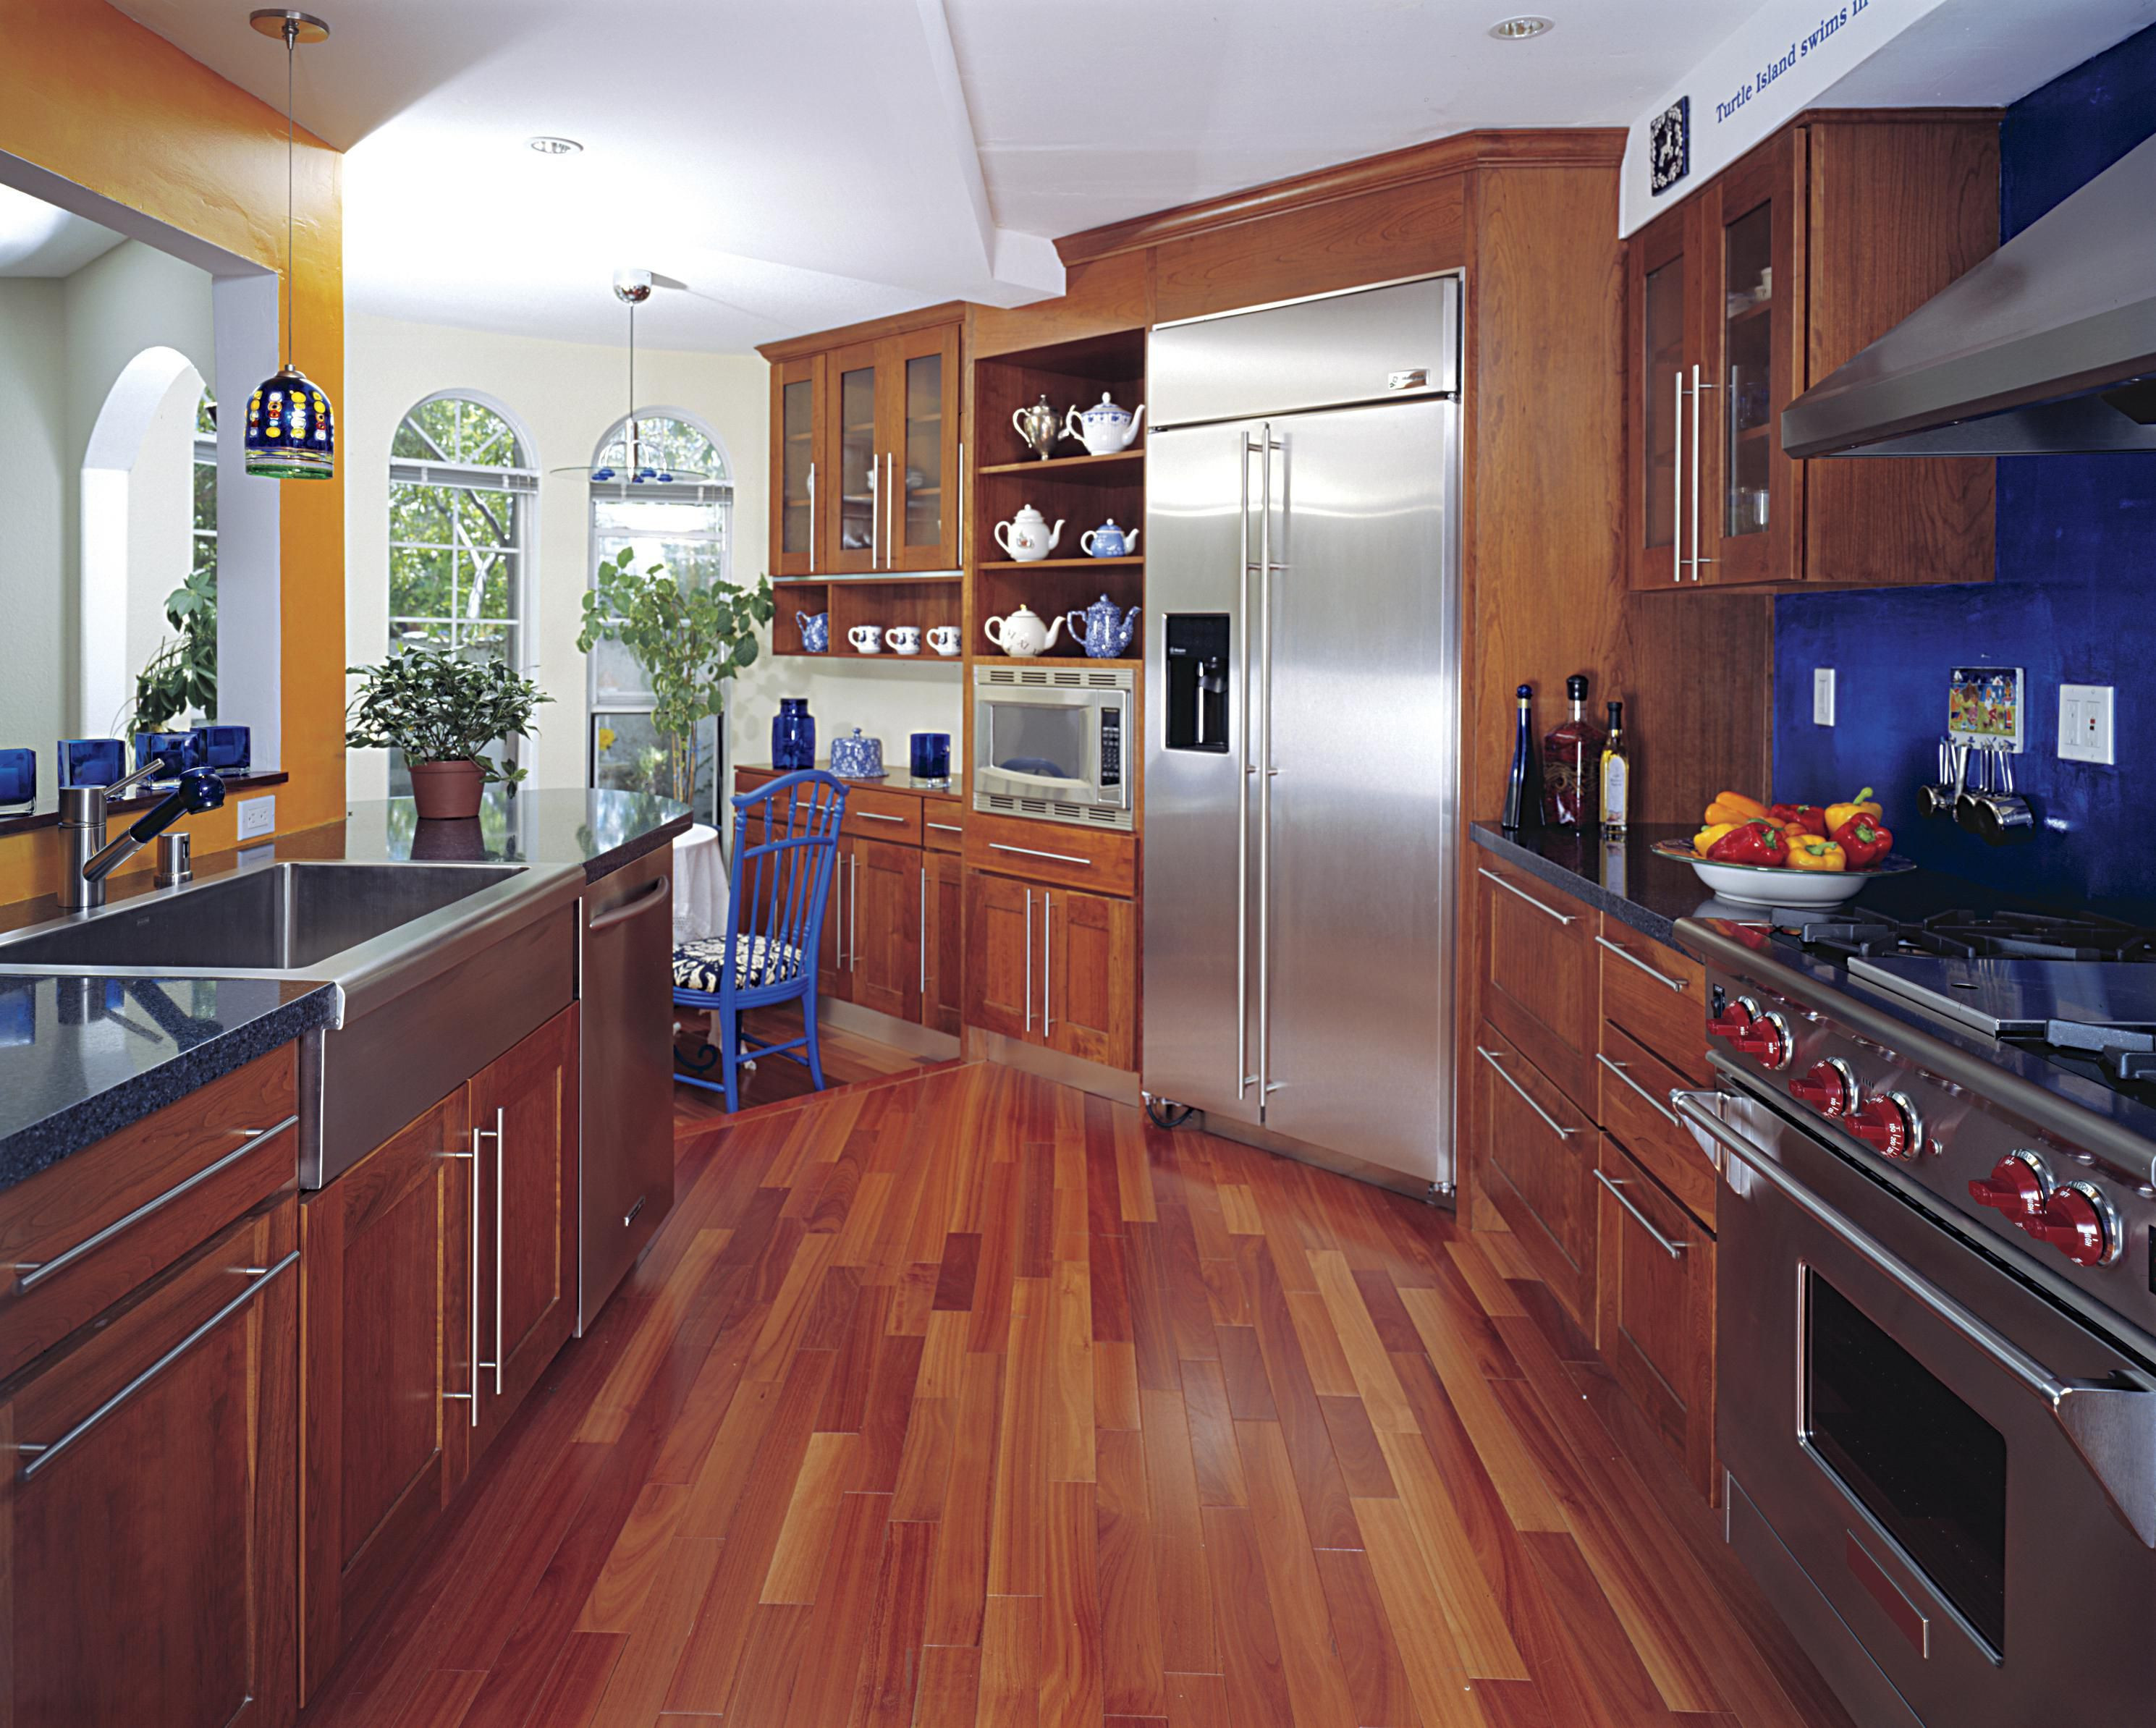 25 Unique Wickham Hardwood Flooring Retailers 2023 free download wickham hardwood flooring retailers of hardwood floor in a kitchen is this allowed throughout 186828472 56a49f3a5f9b58b7d0d7e142